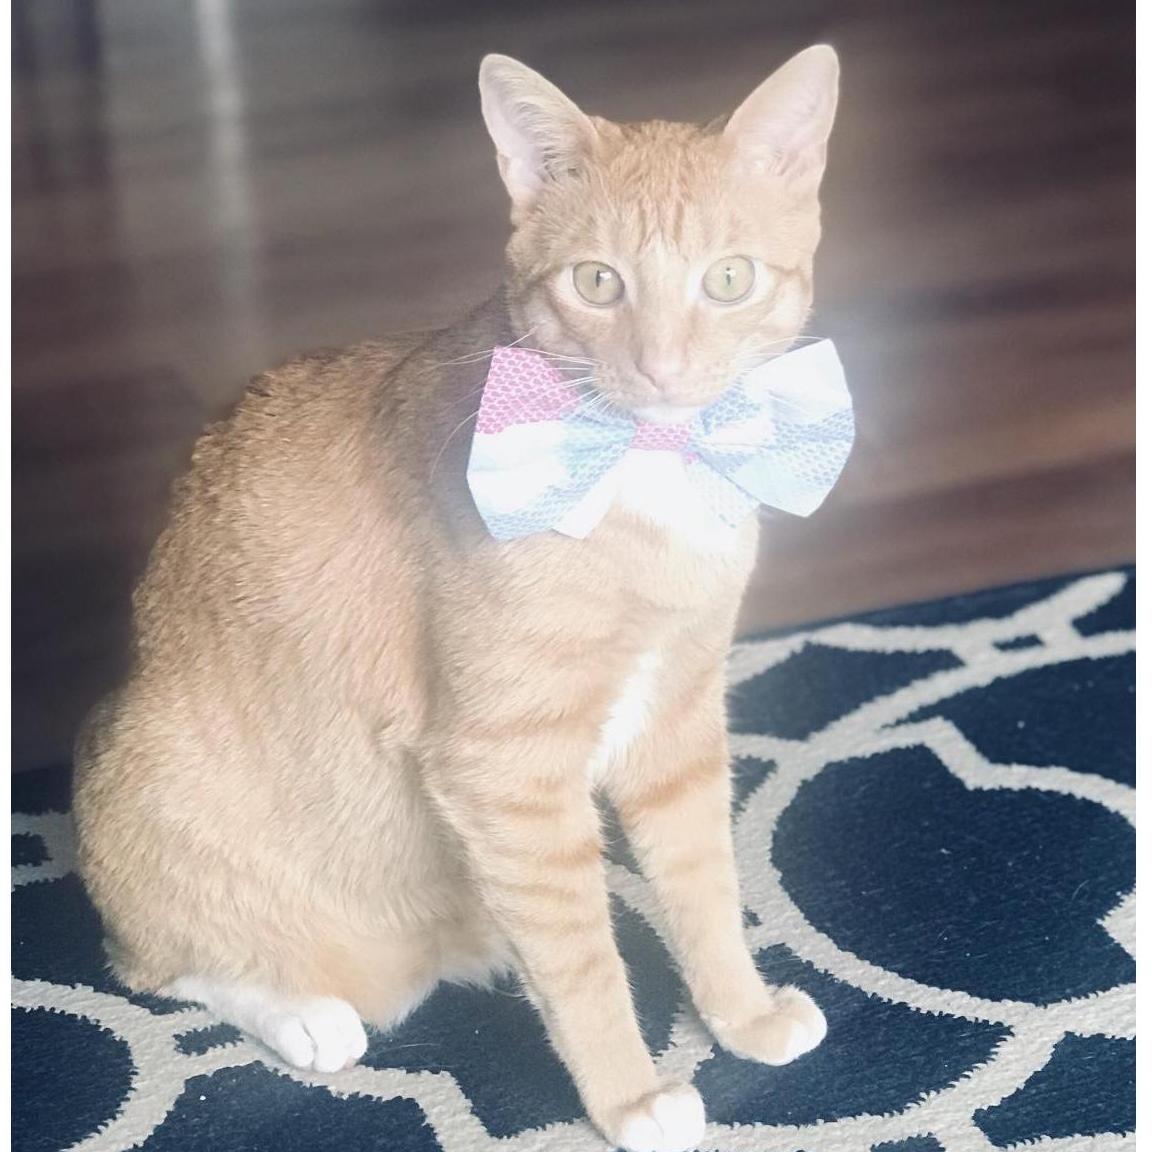 Mr. Fin, BRIDE and GROOMS fur baby!